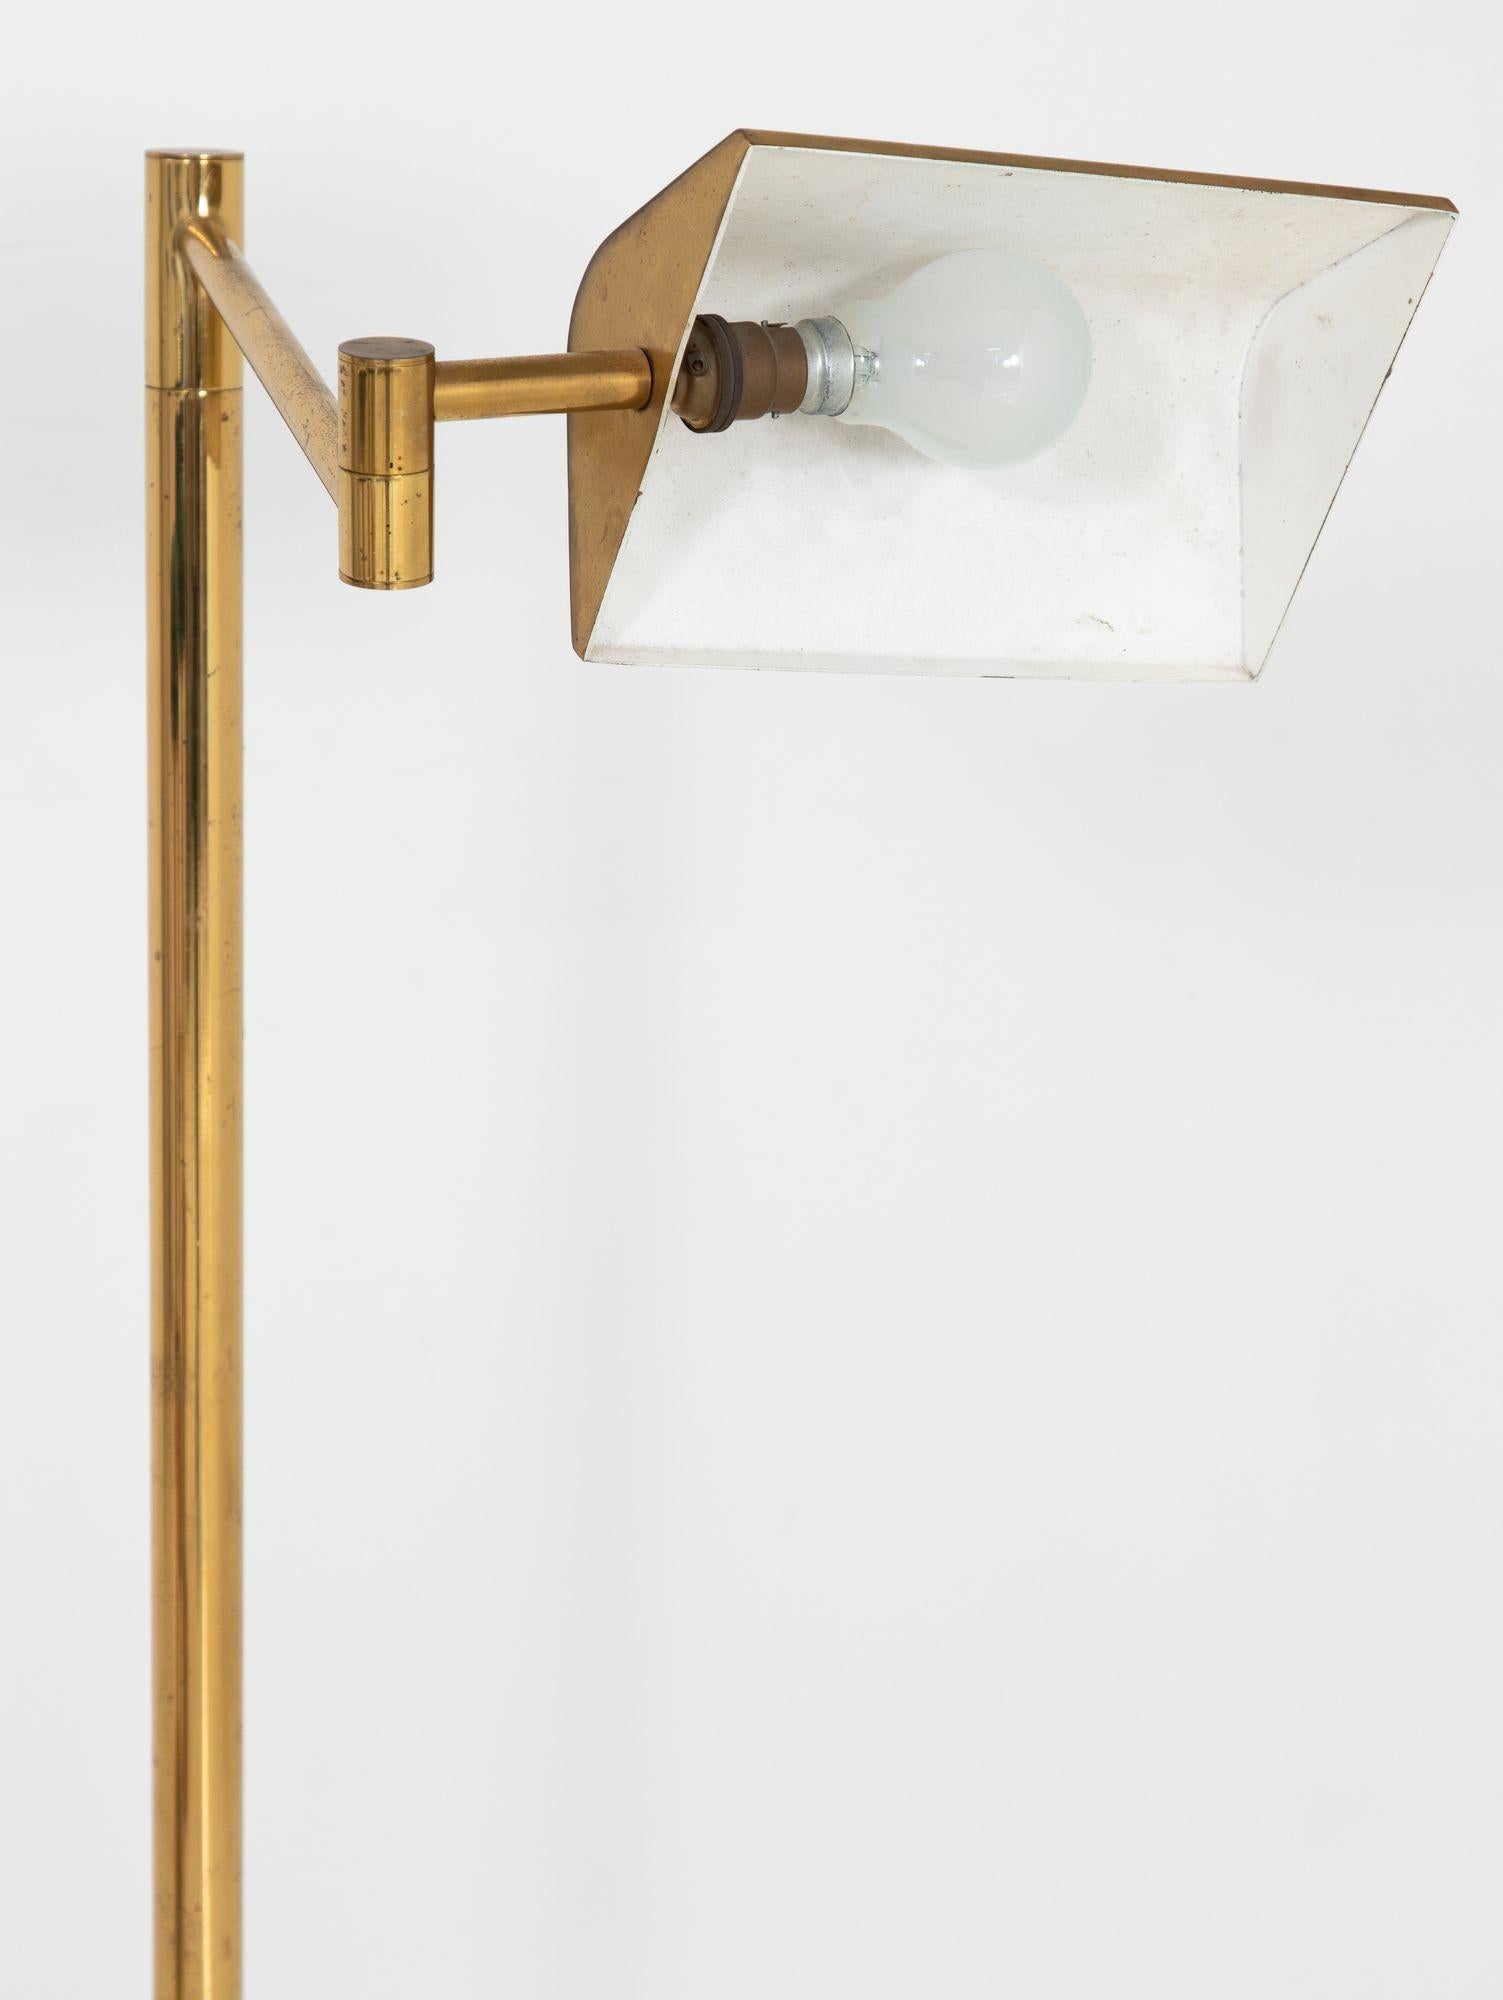 Vintage Brass Floor Lamp, France mid 20th Century For Sale 2